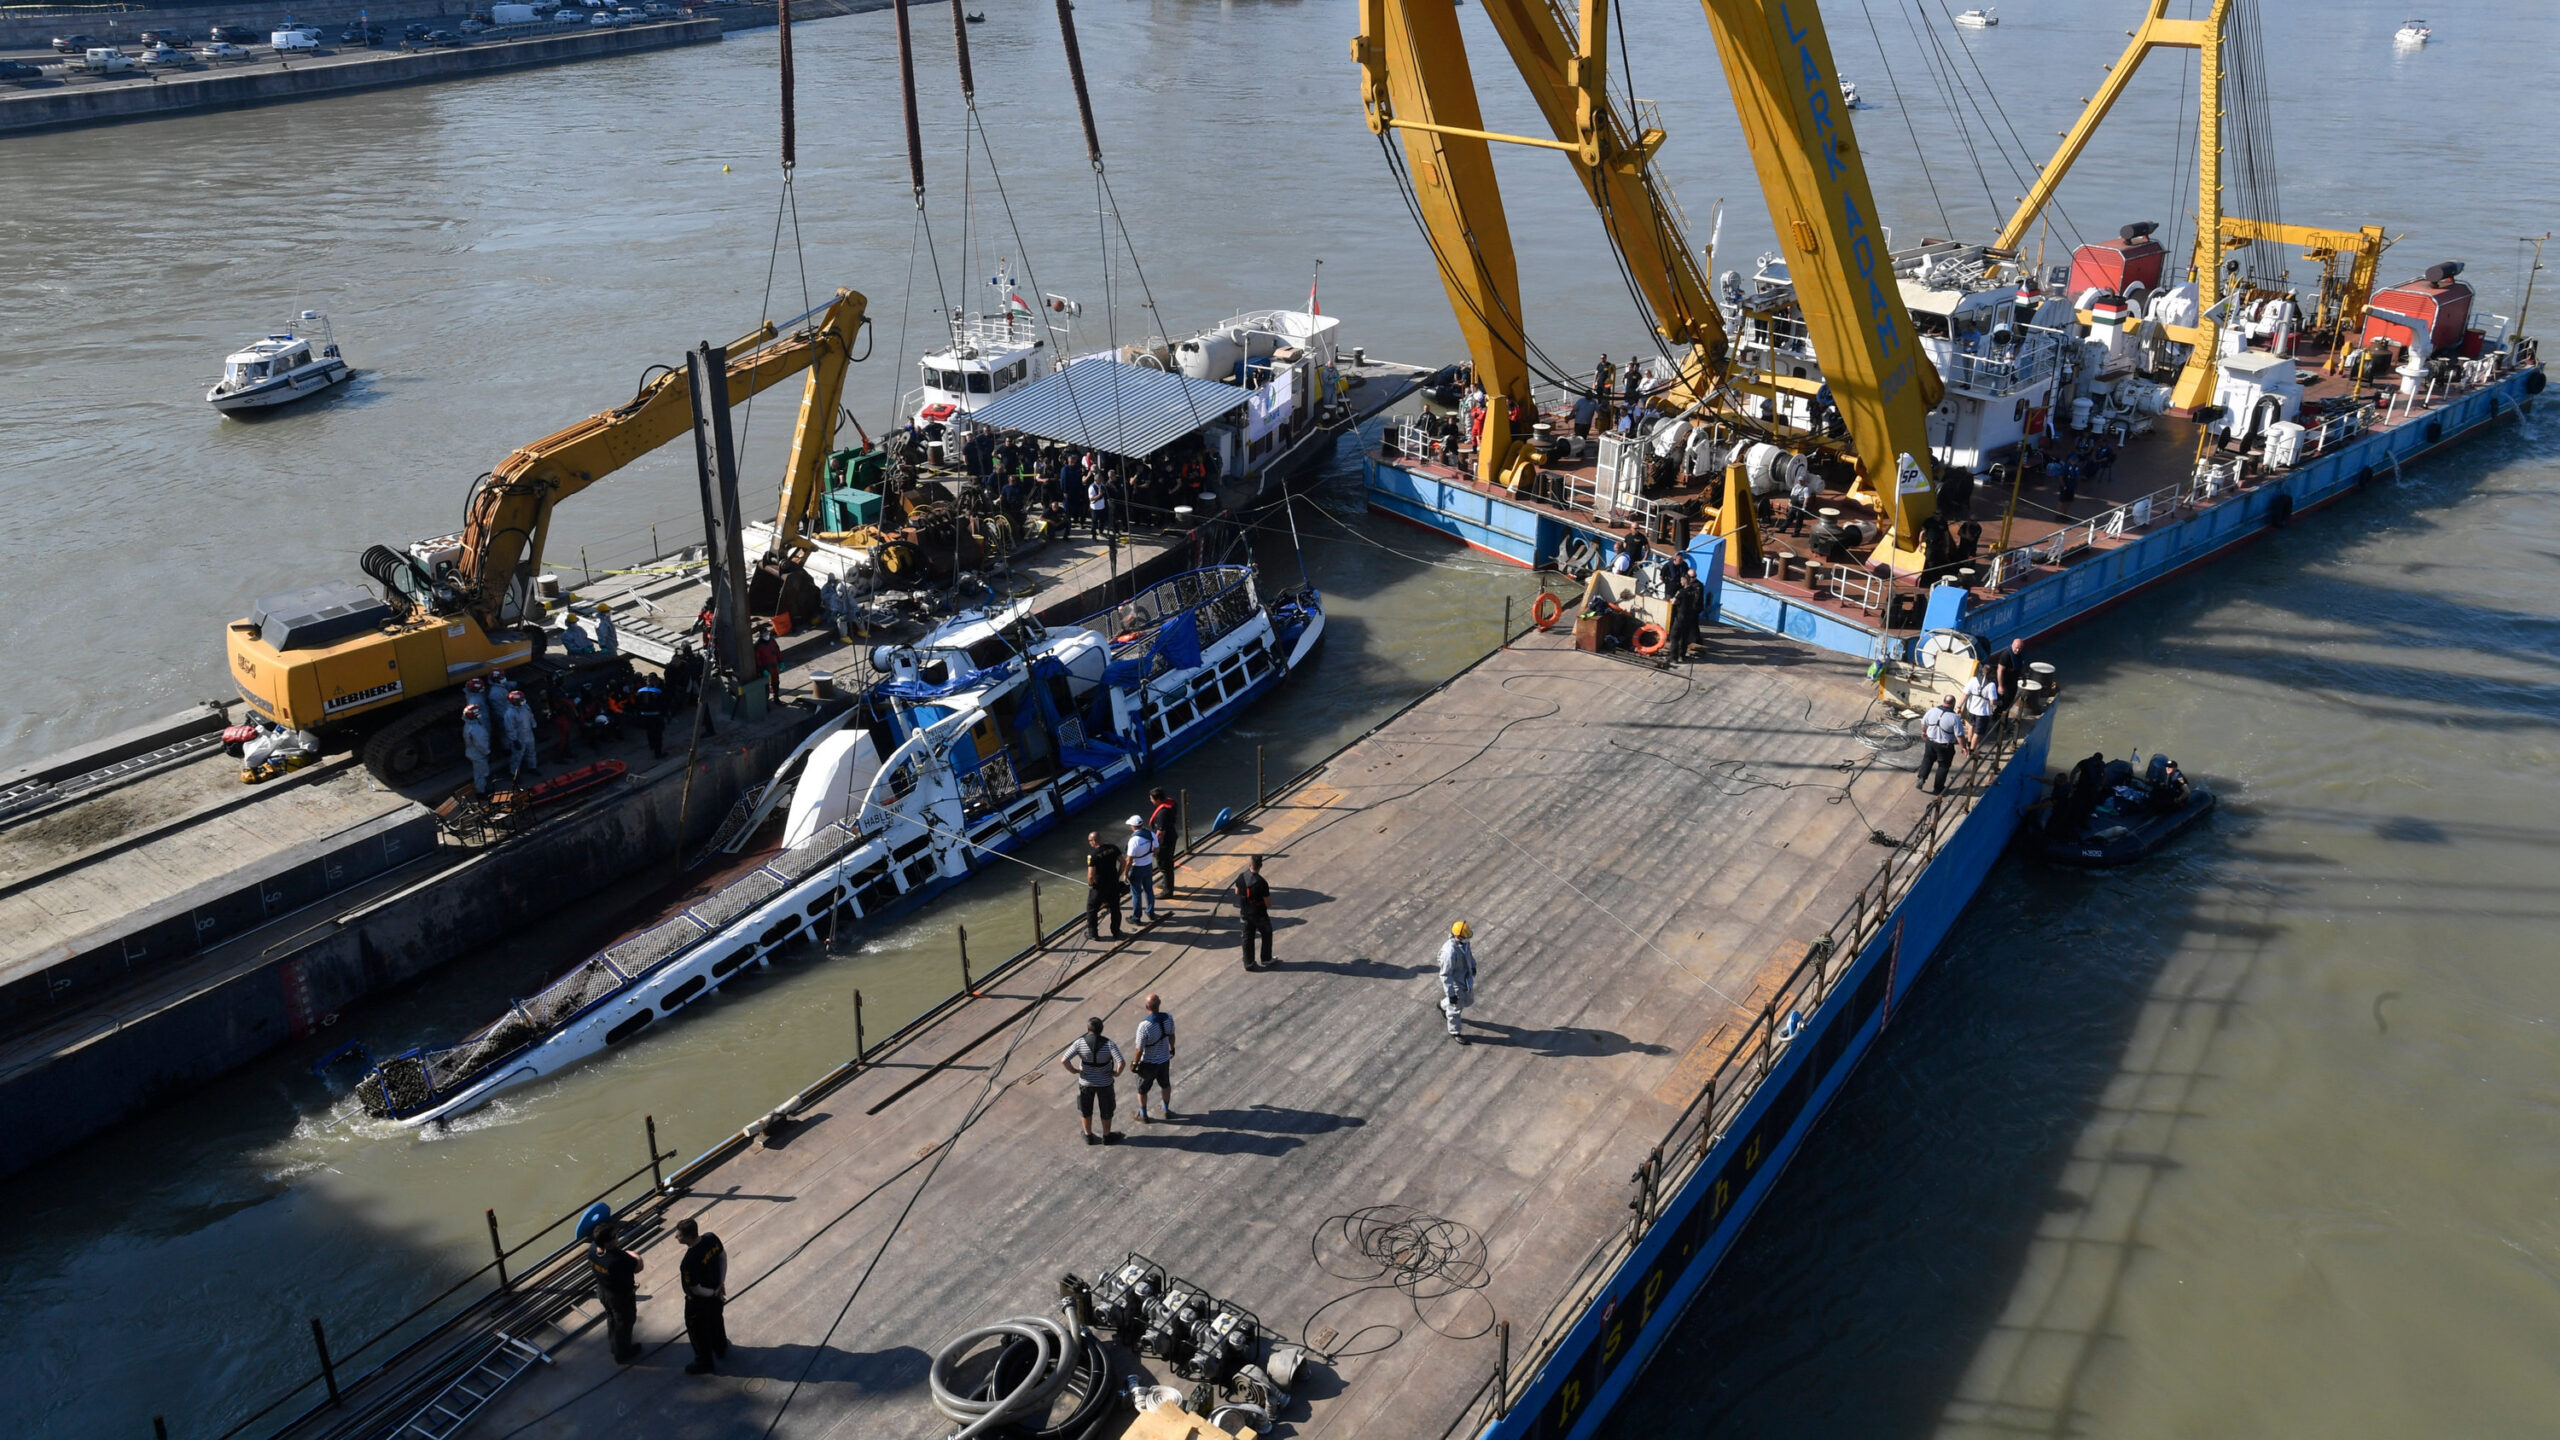 Mermaid crane lifted from Danube after collision